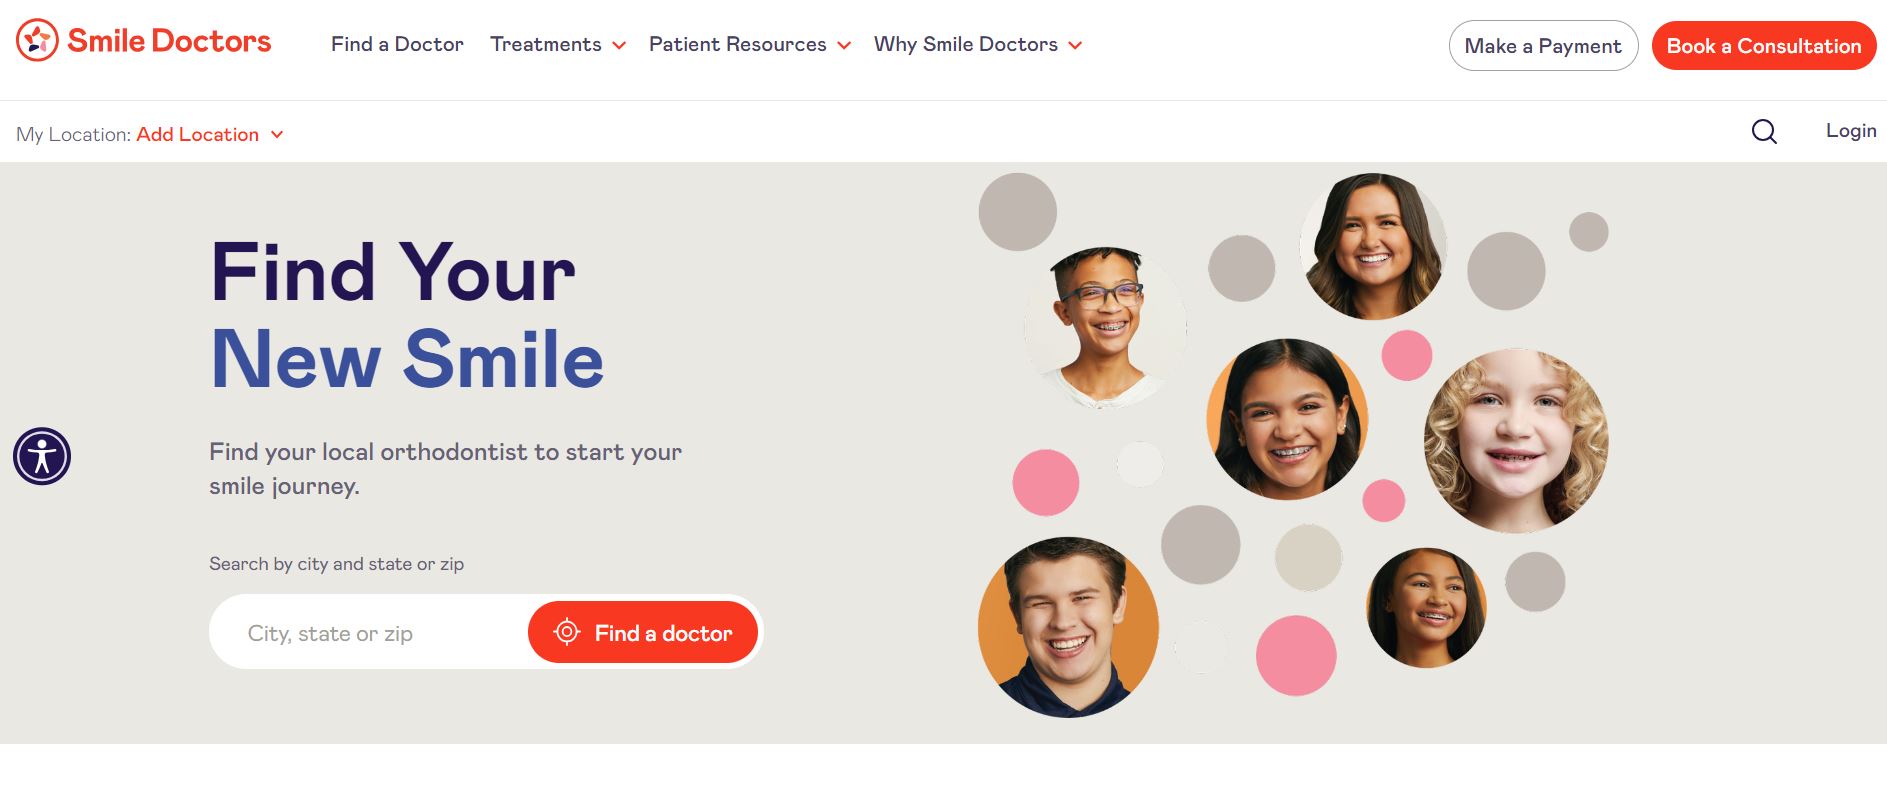 Smile Doctors: Dallas-based startup reshaping health, led by J. Hedrick, $550M funding